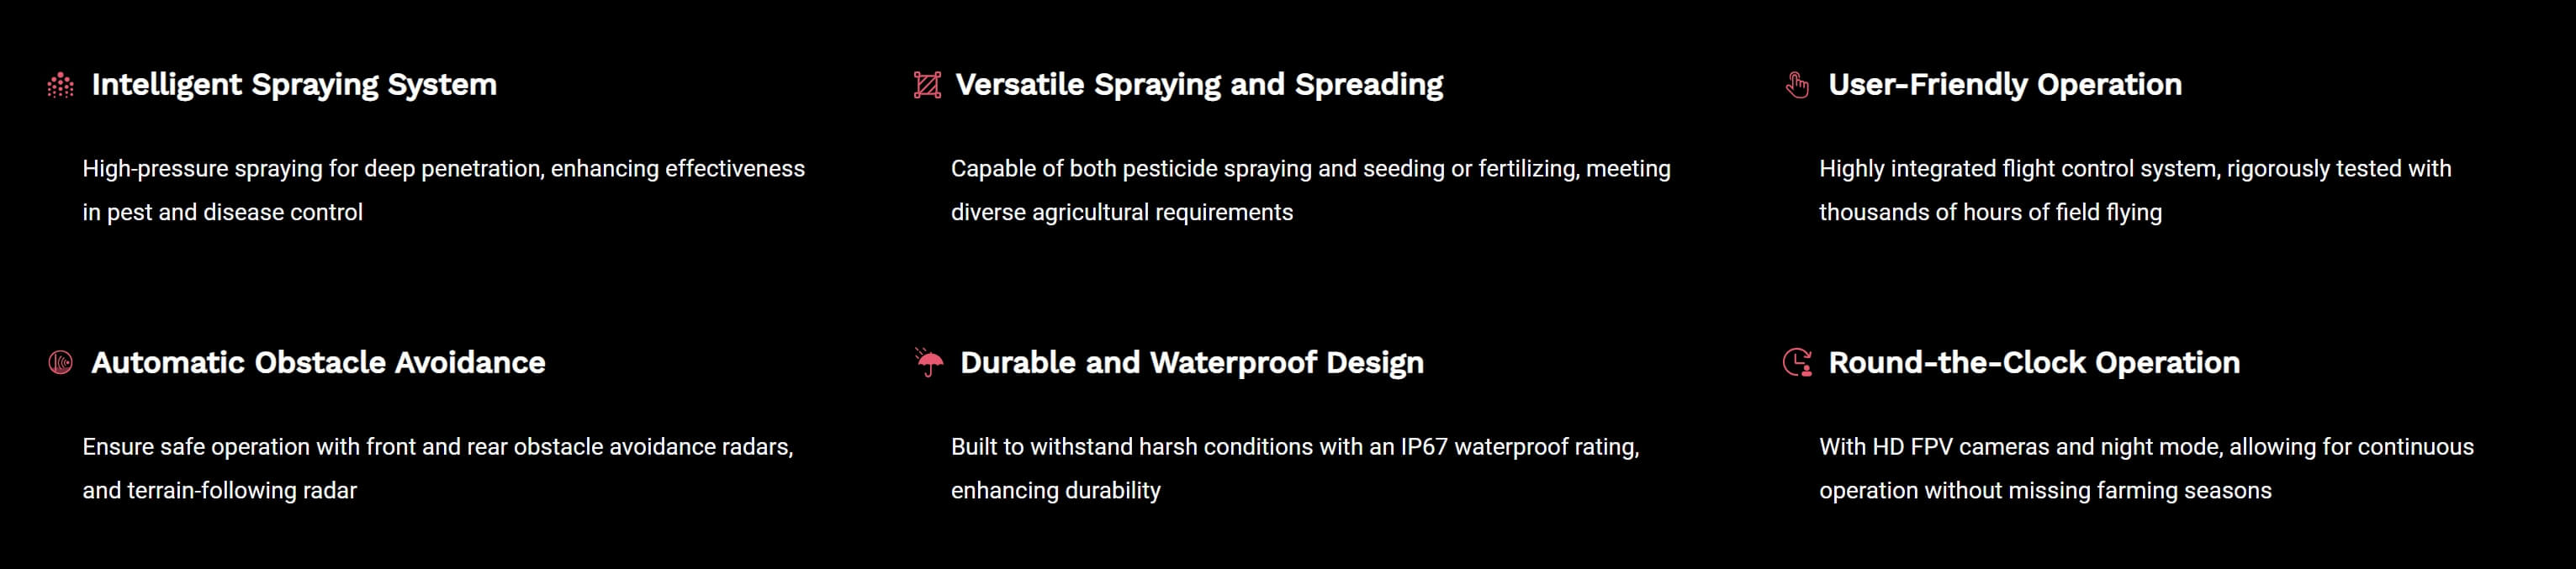 H40X Agriculture Drone, Intelligent Spraying System 1 Versatile Spraying and Spreading User-Friendly Operation